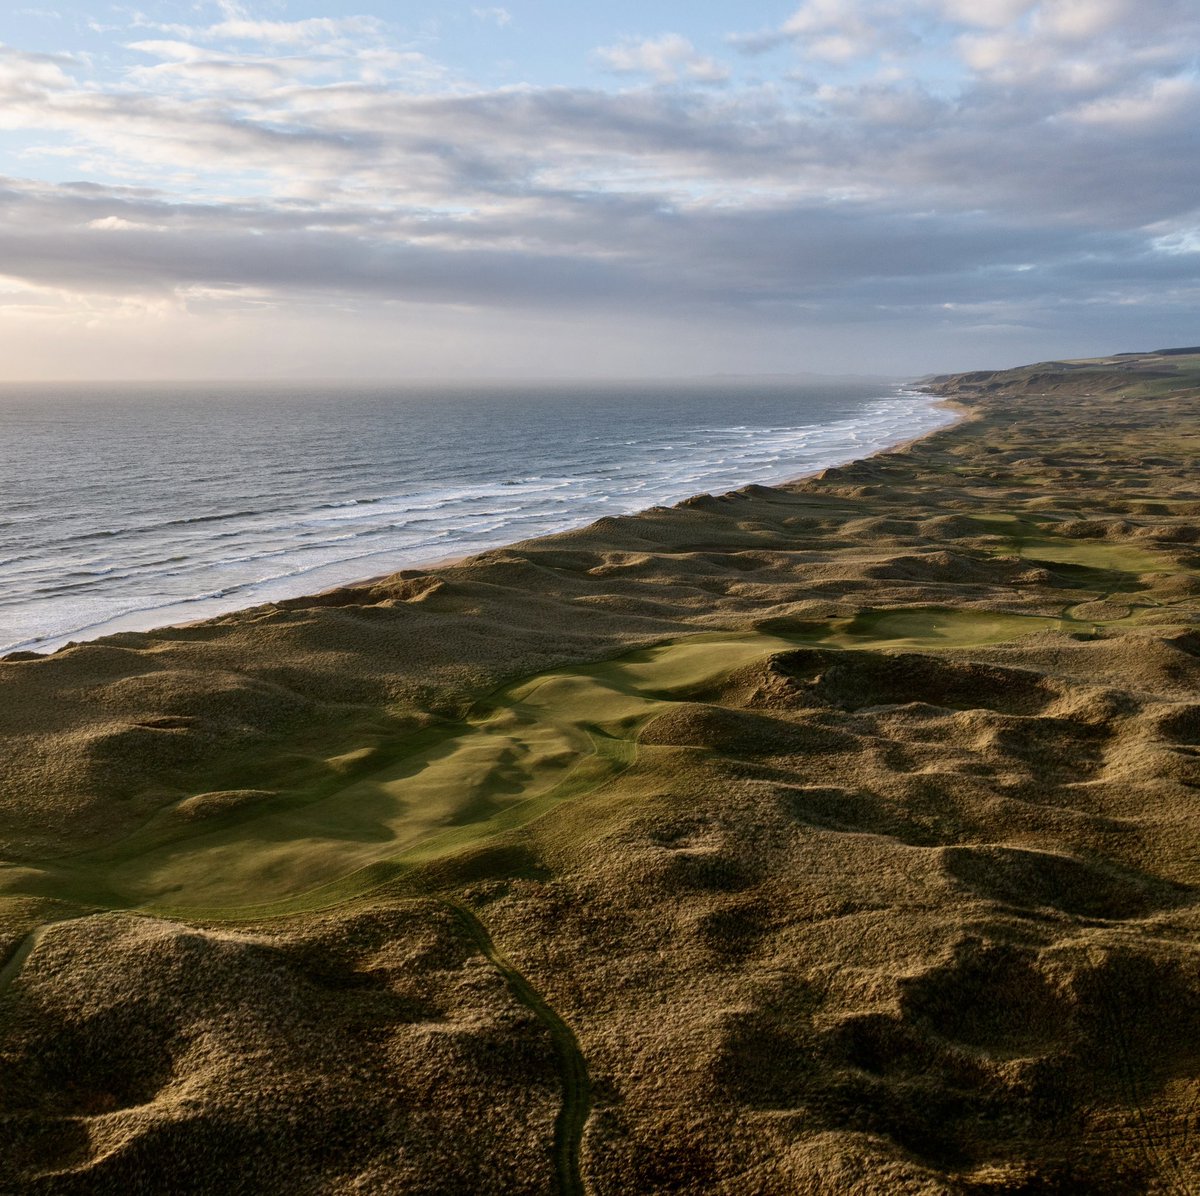 “It is all there in this rough-and-tumble stretch of picturesque duneland: elevated tees with breathtaking views across high shaggy sandhills; half-glimpsed fairways pitching and tossing at every imaginable cant or dog-legging gently around sentinel dunes; now a blind green in a…